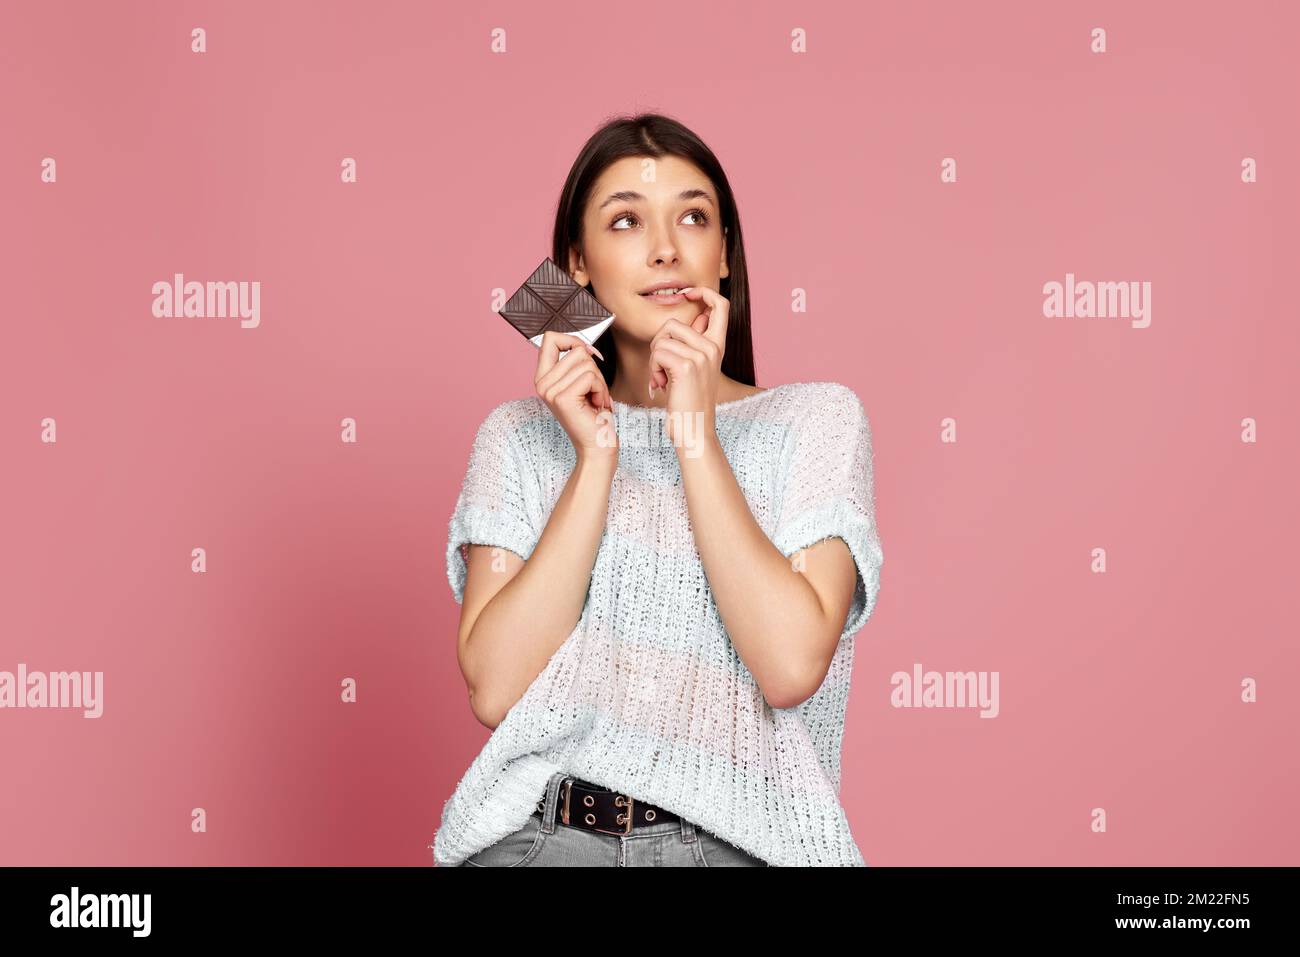 young woman in sweater holding chocolate bar Stock Photo